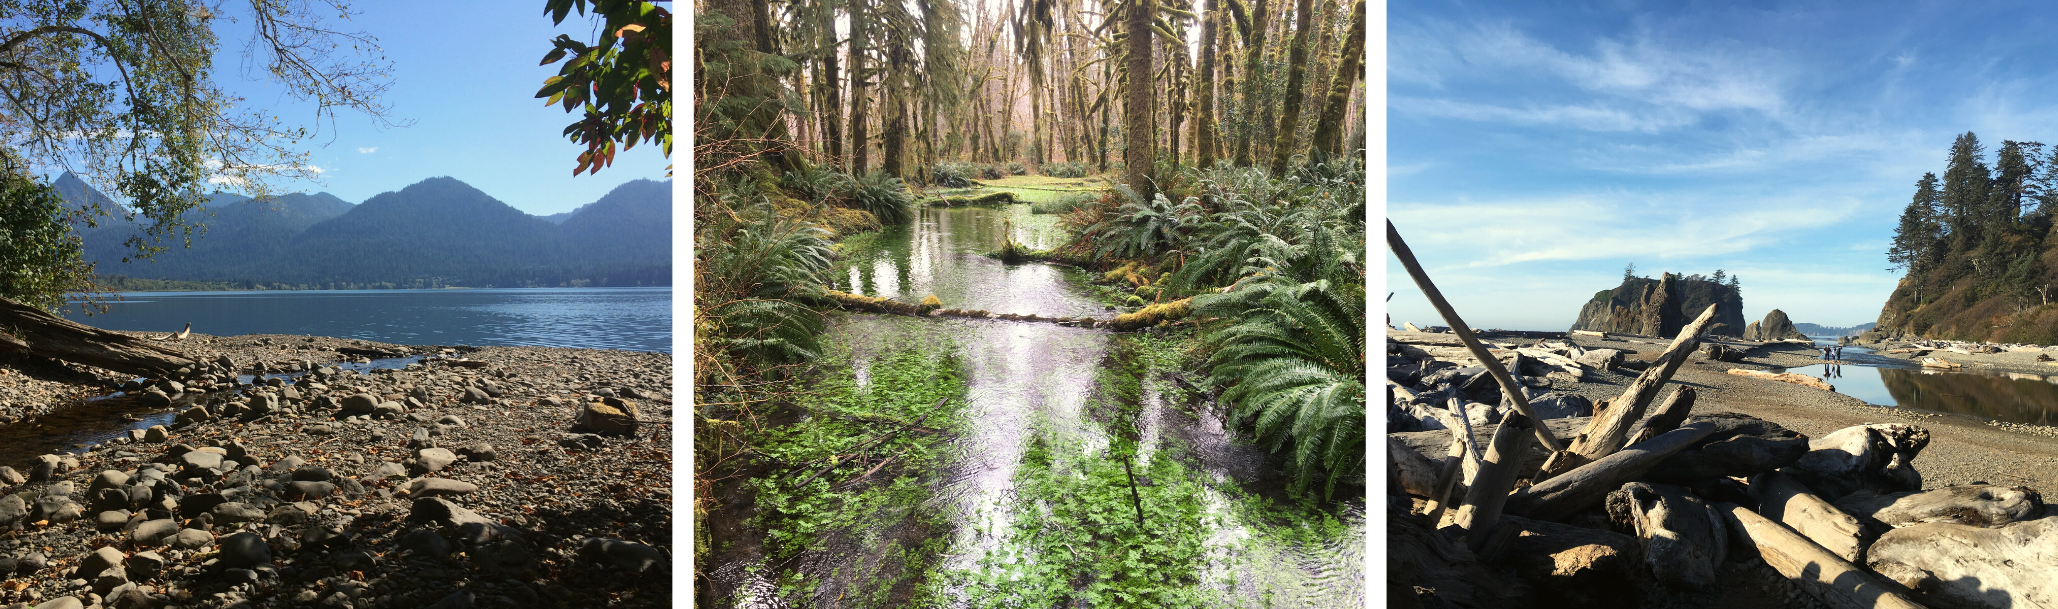 Lake Quinault, a rainforest hike, and Ruby Beach in the Olympic National Park